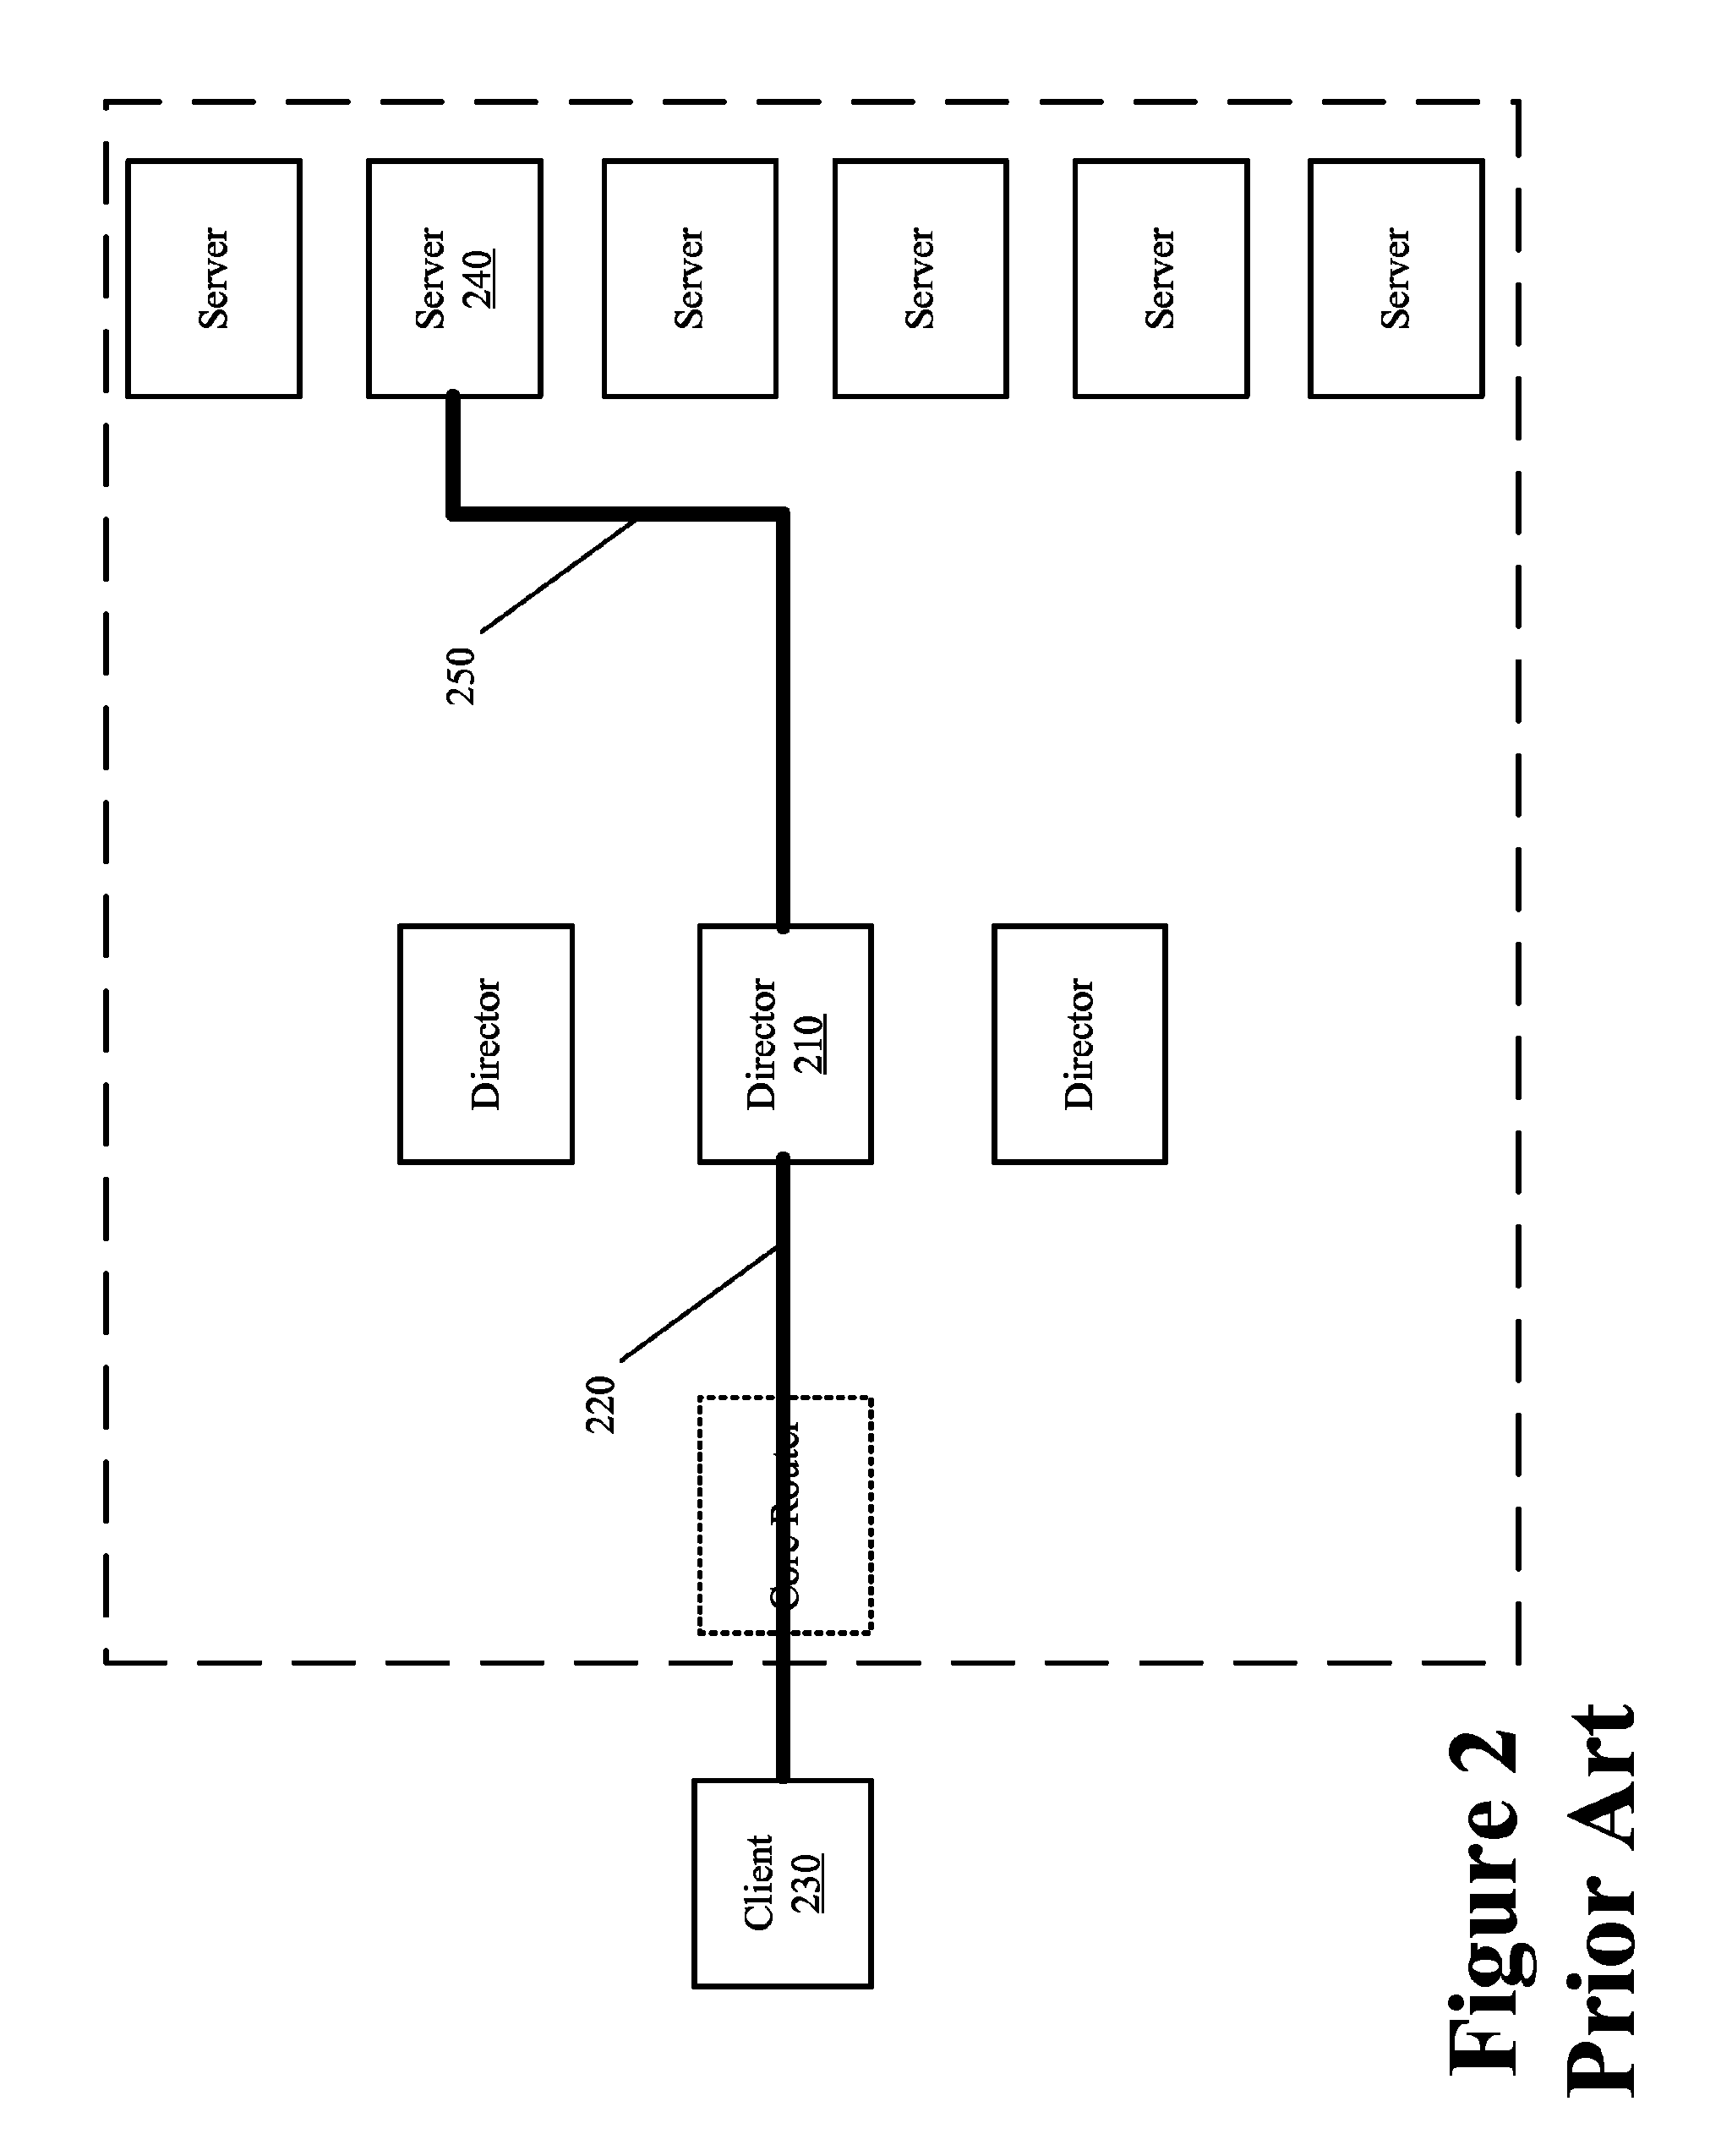 Network connection hand-off using state transformations